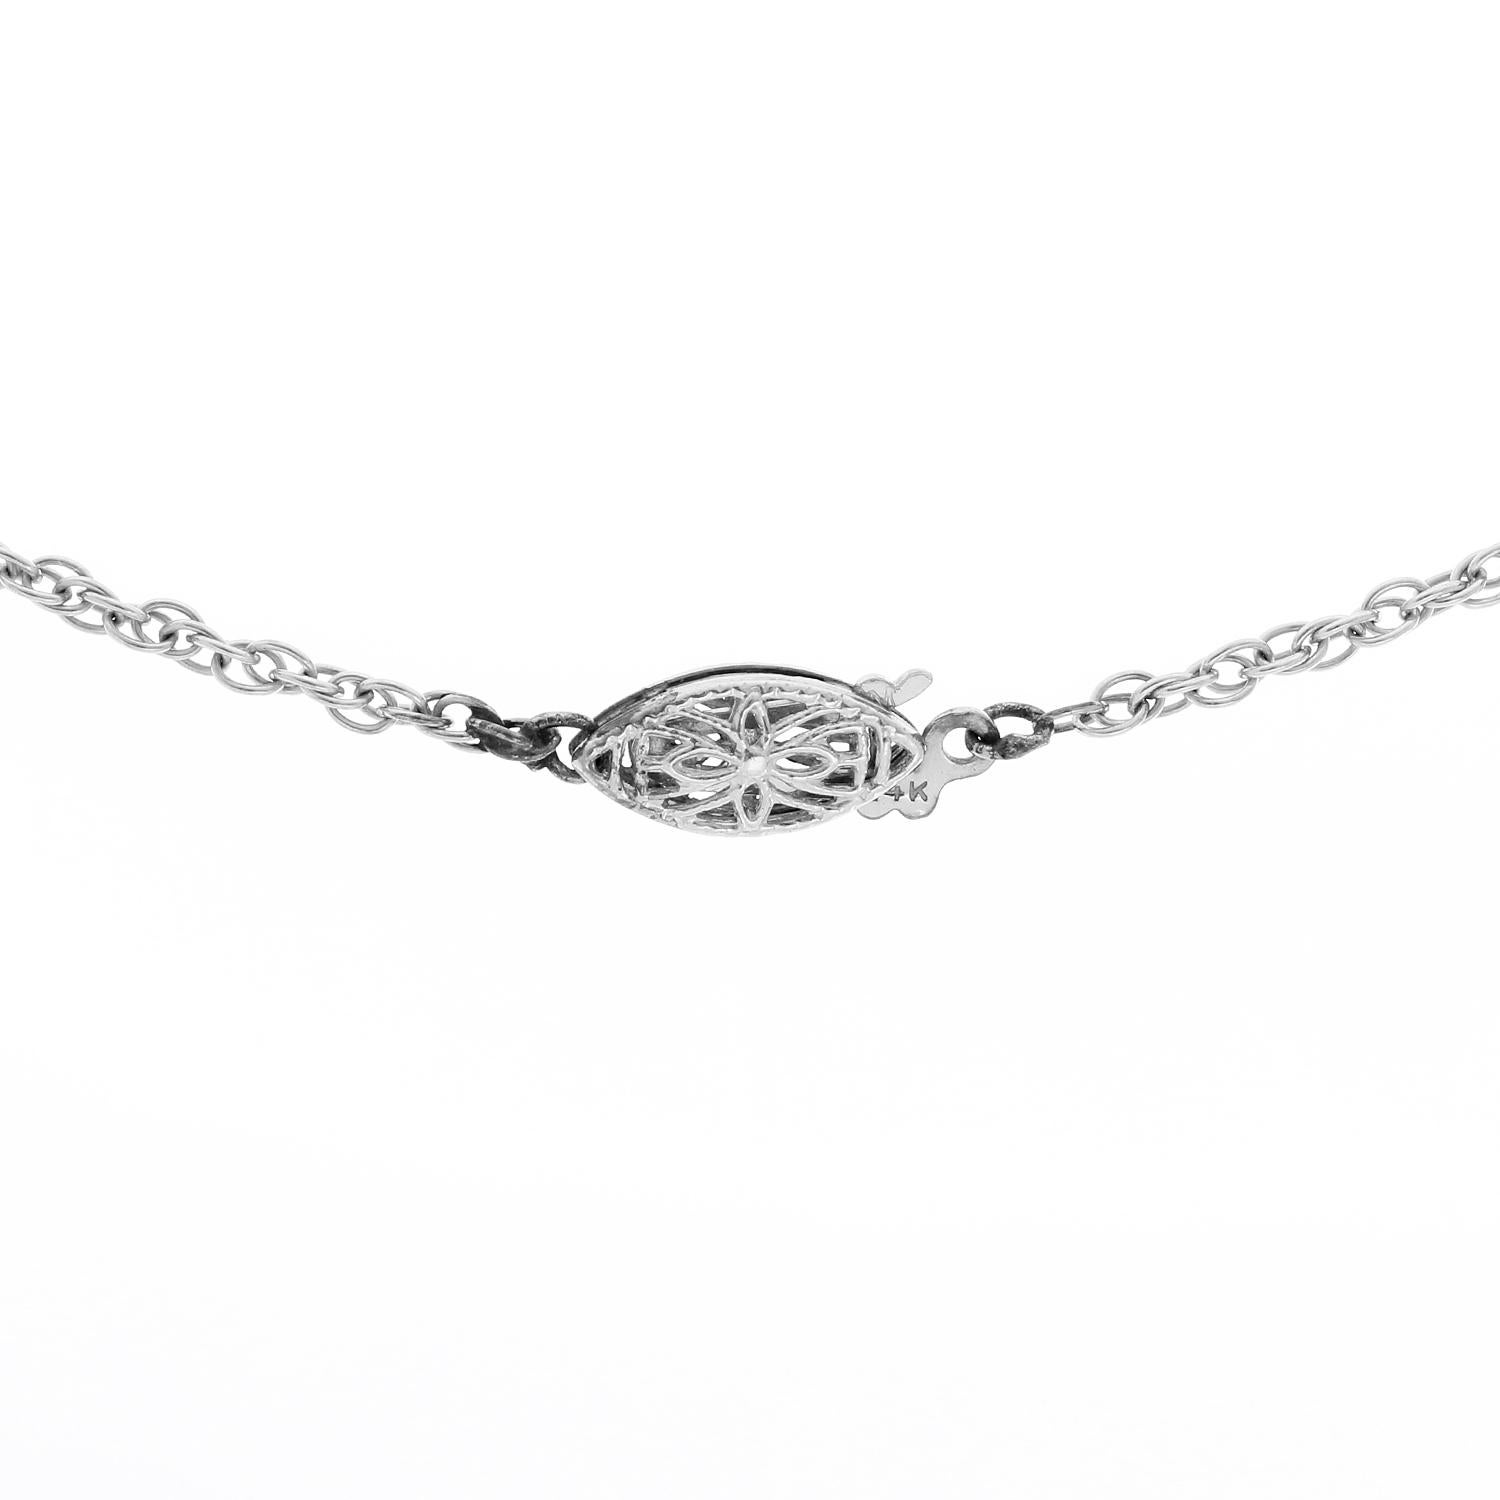 Platinum Garland Style Pendant on White Gold Chain In Excellent Condition For Sale In Dallas, TX